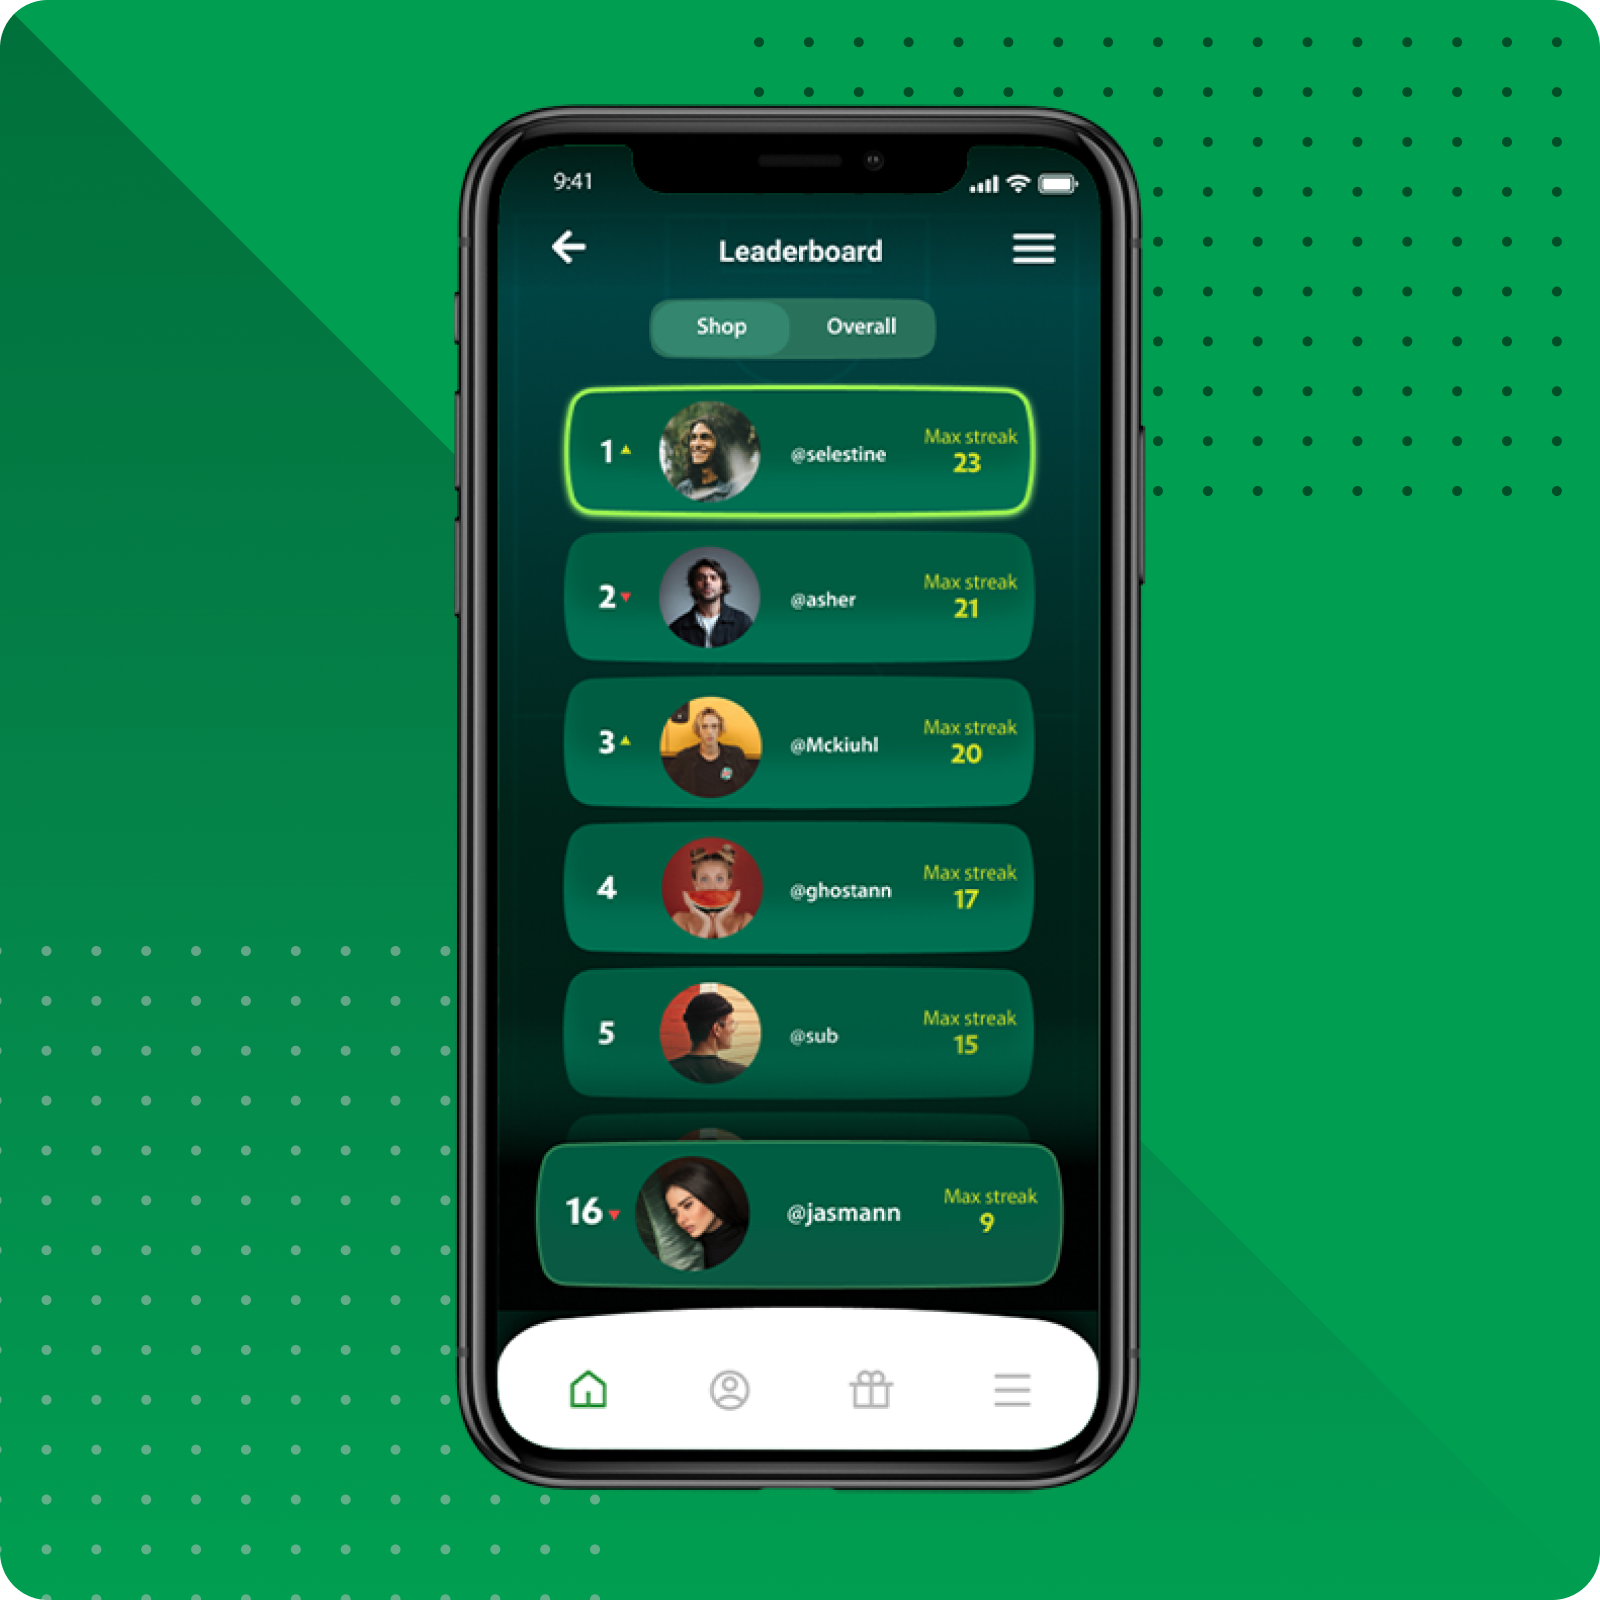 High fidelity wireframe of Paddy Power mobile app interface design